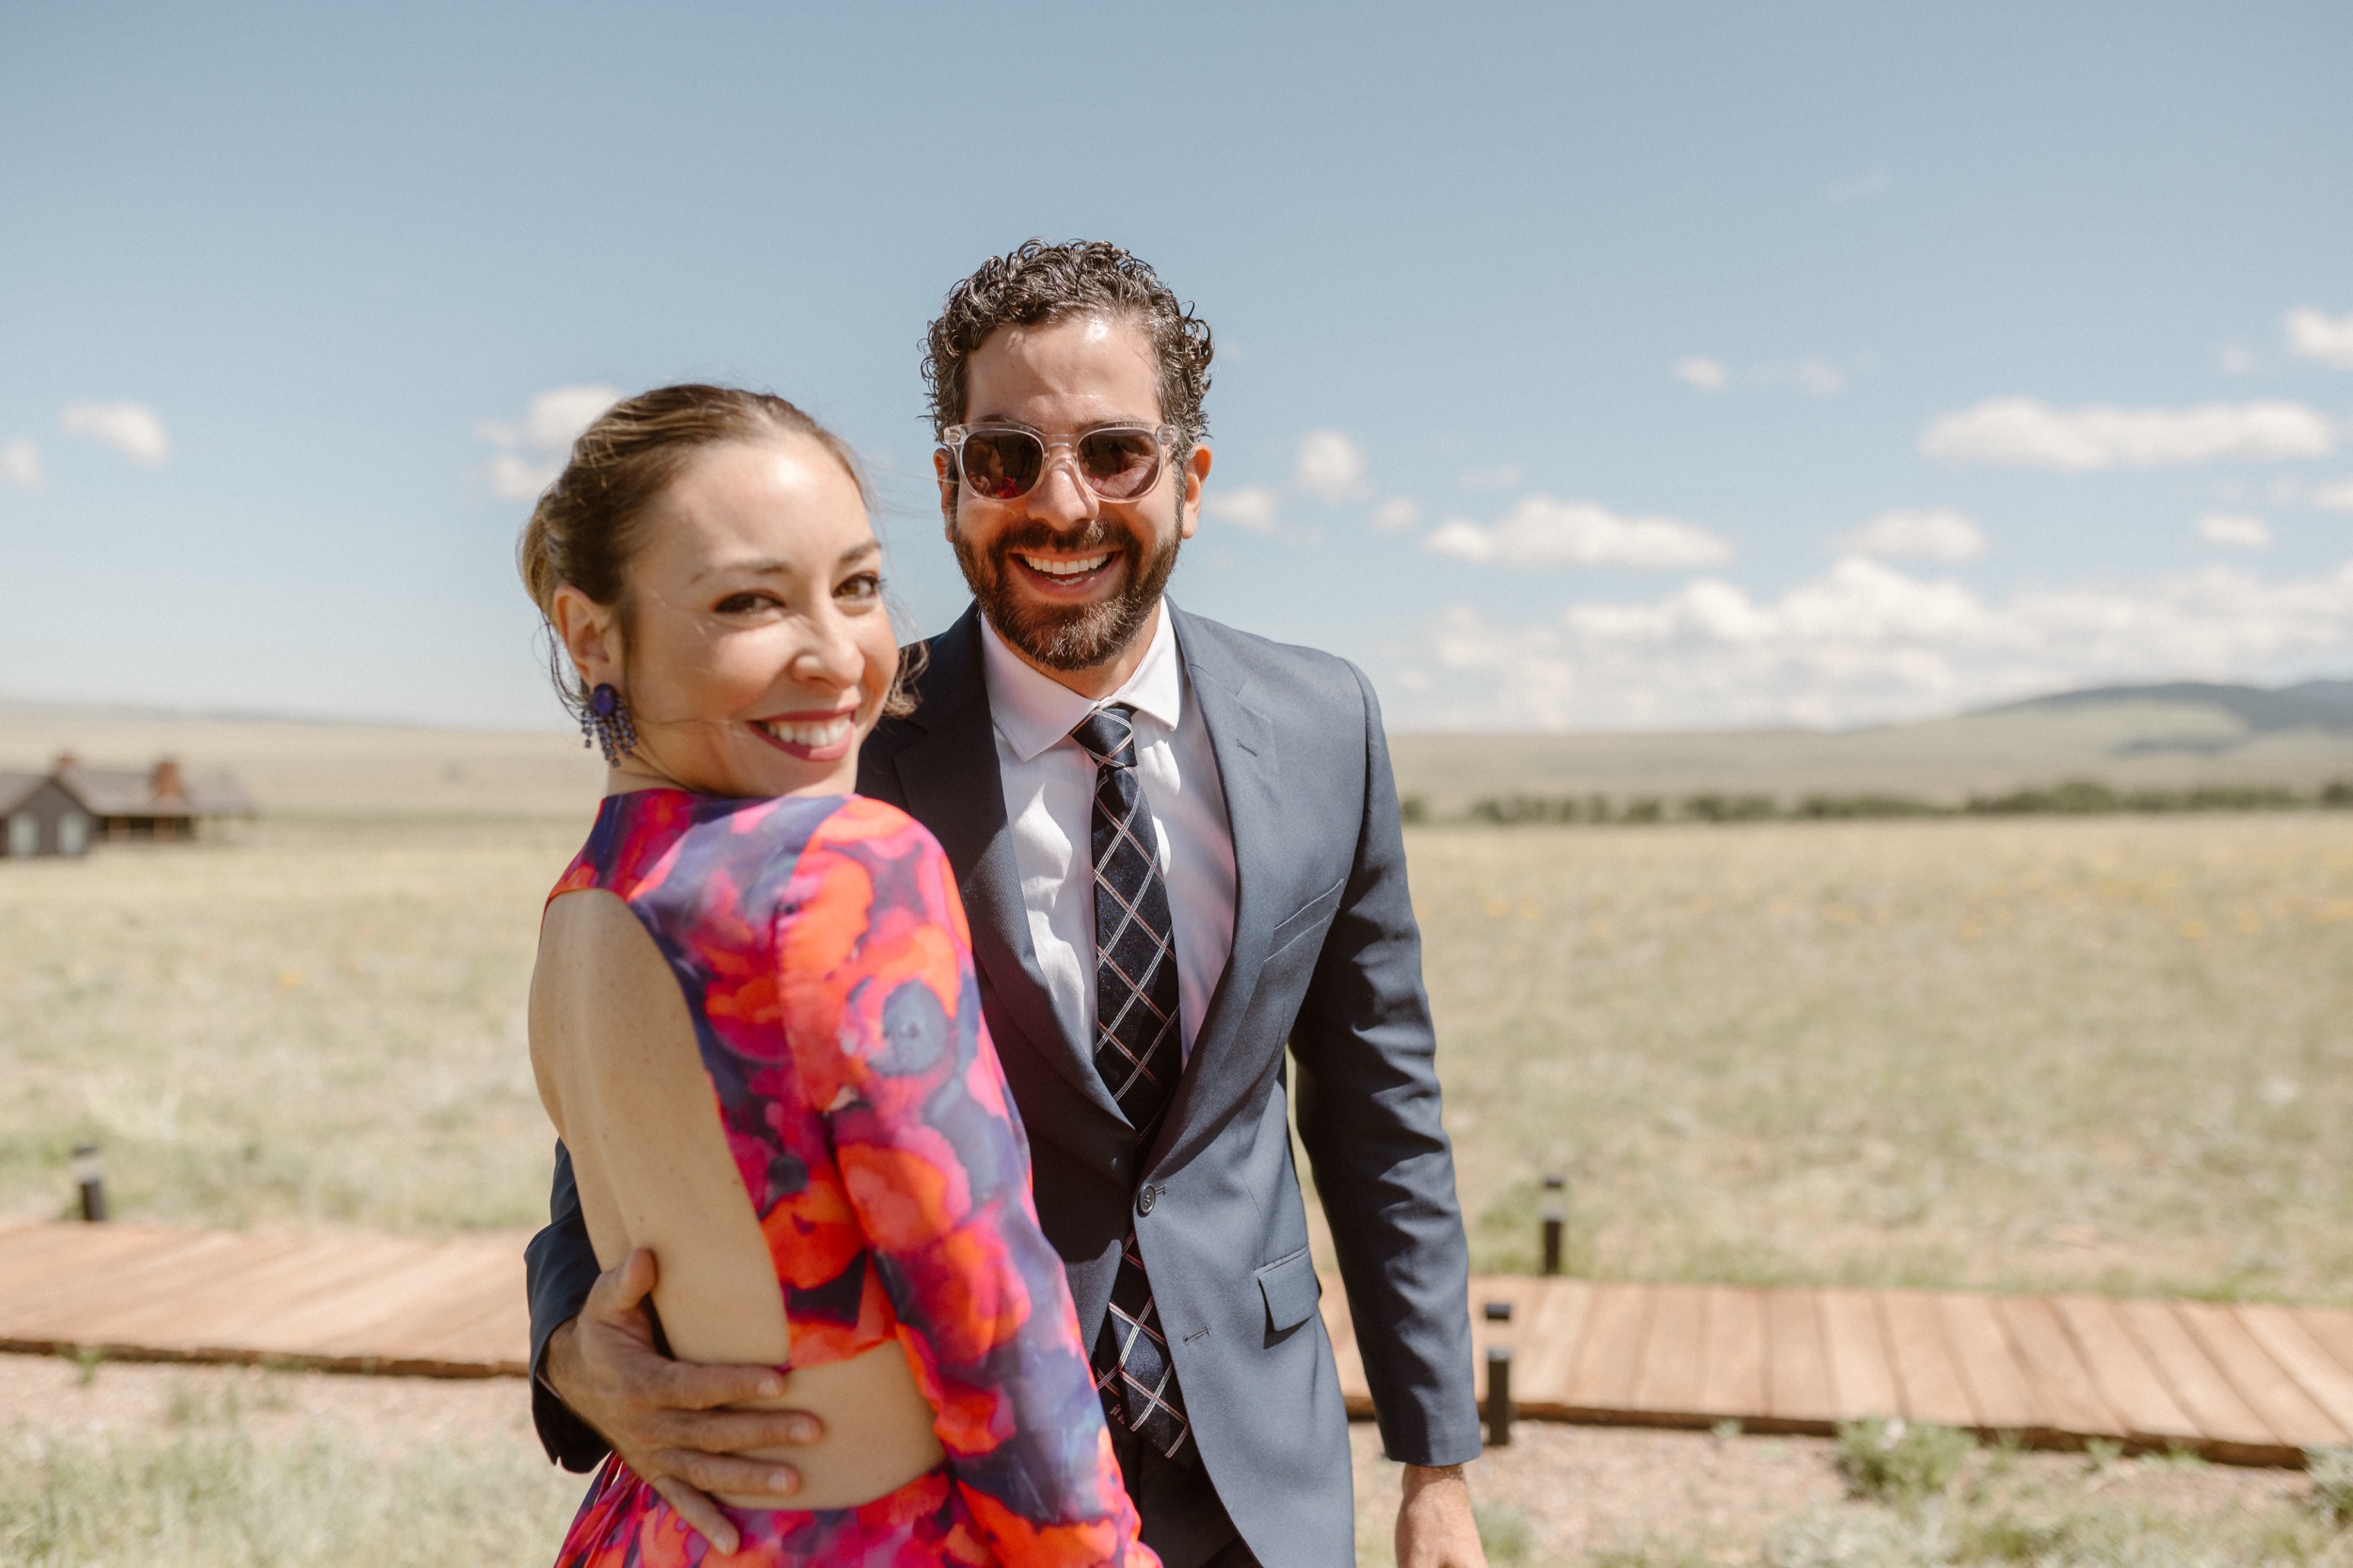 Two wedding guests smiling for the camera. Photo by Colorado wedding photographer, Ashley Joyce